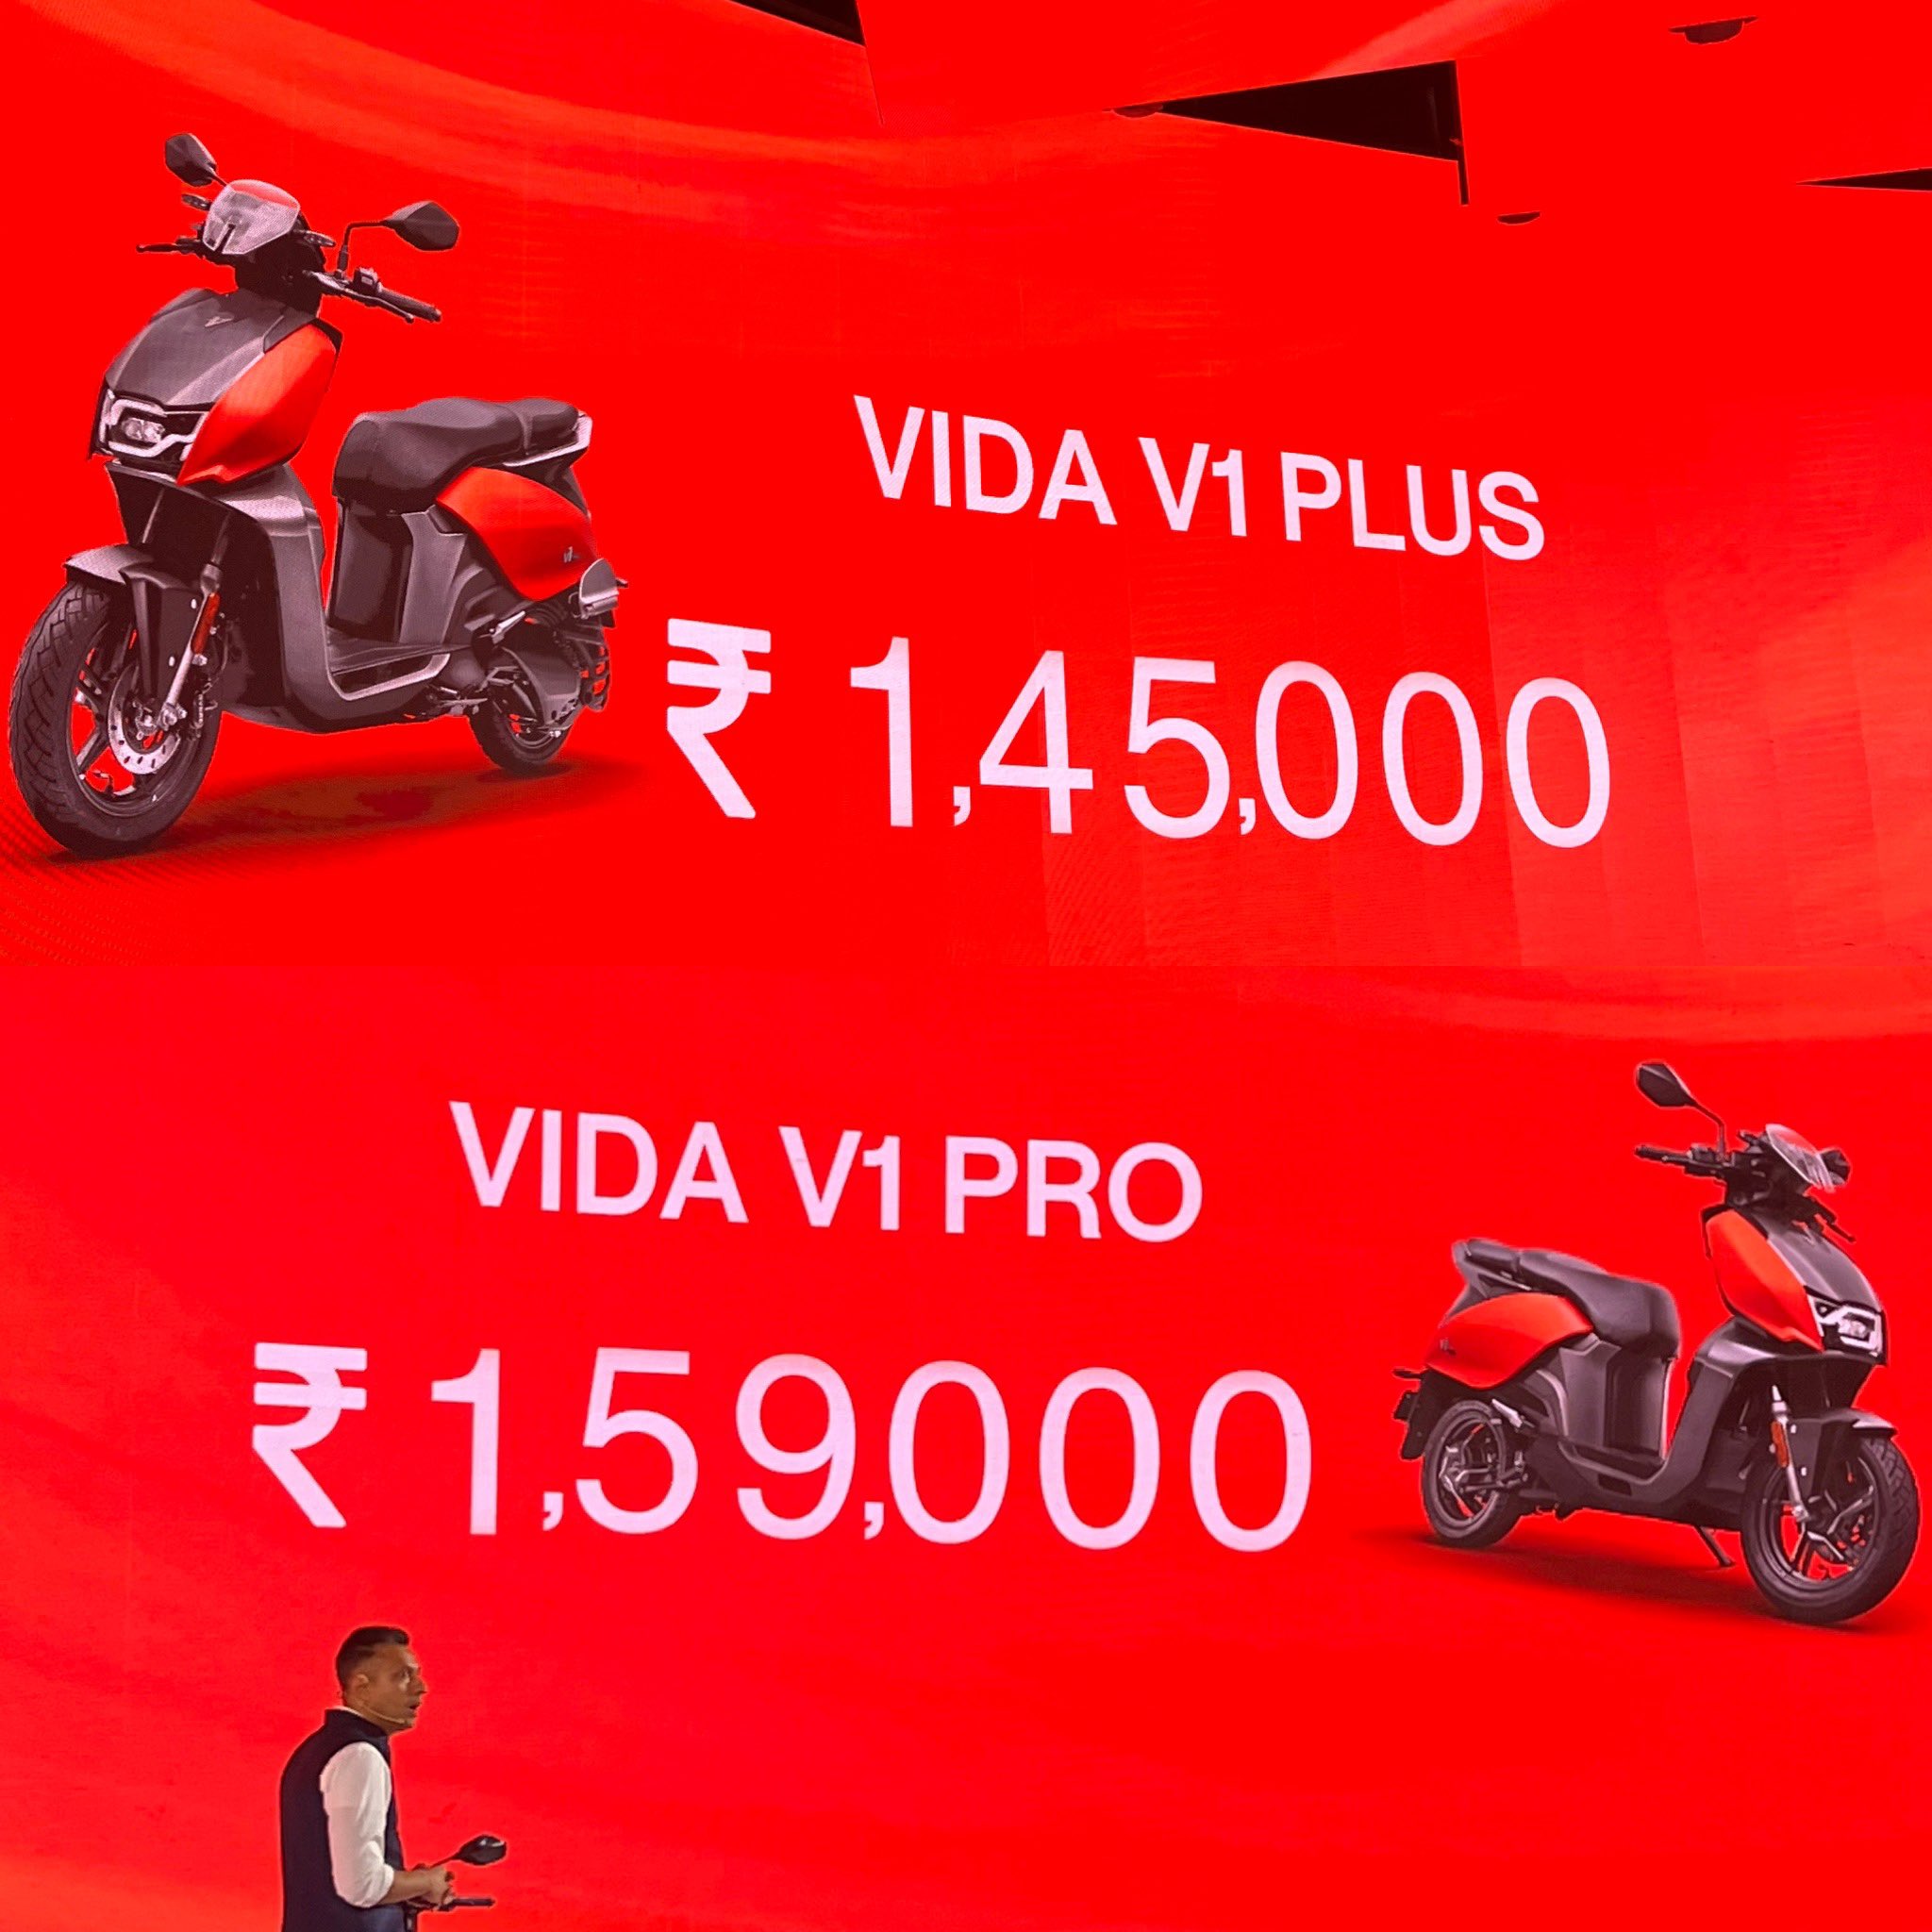 https://e-vehicleinfo.com/hero-vida-v1-electric-scooter-launched-price/